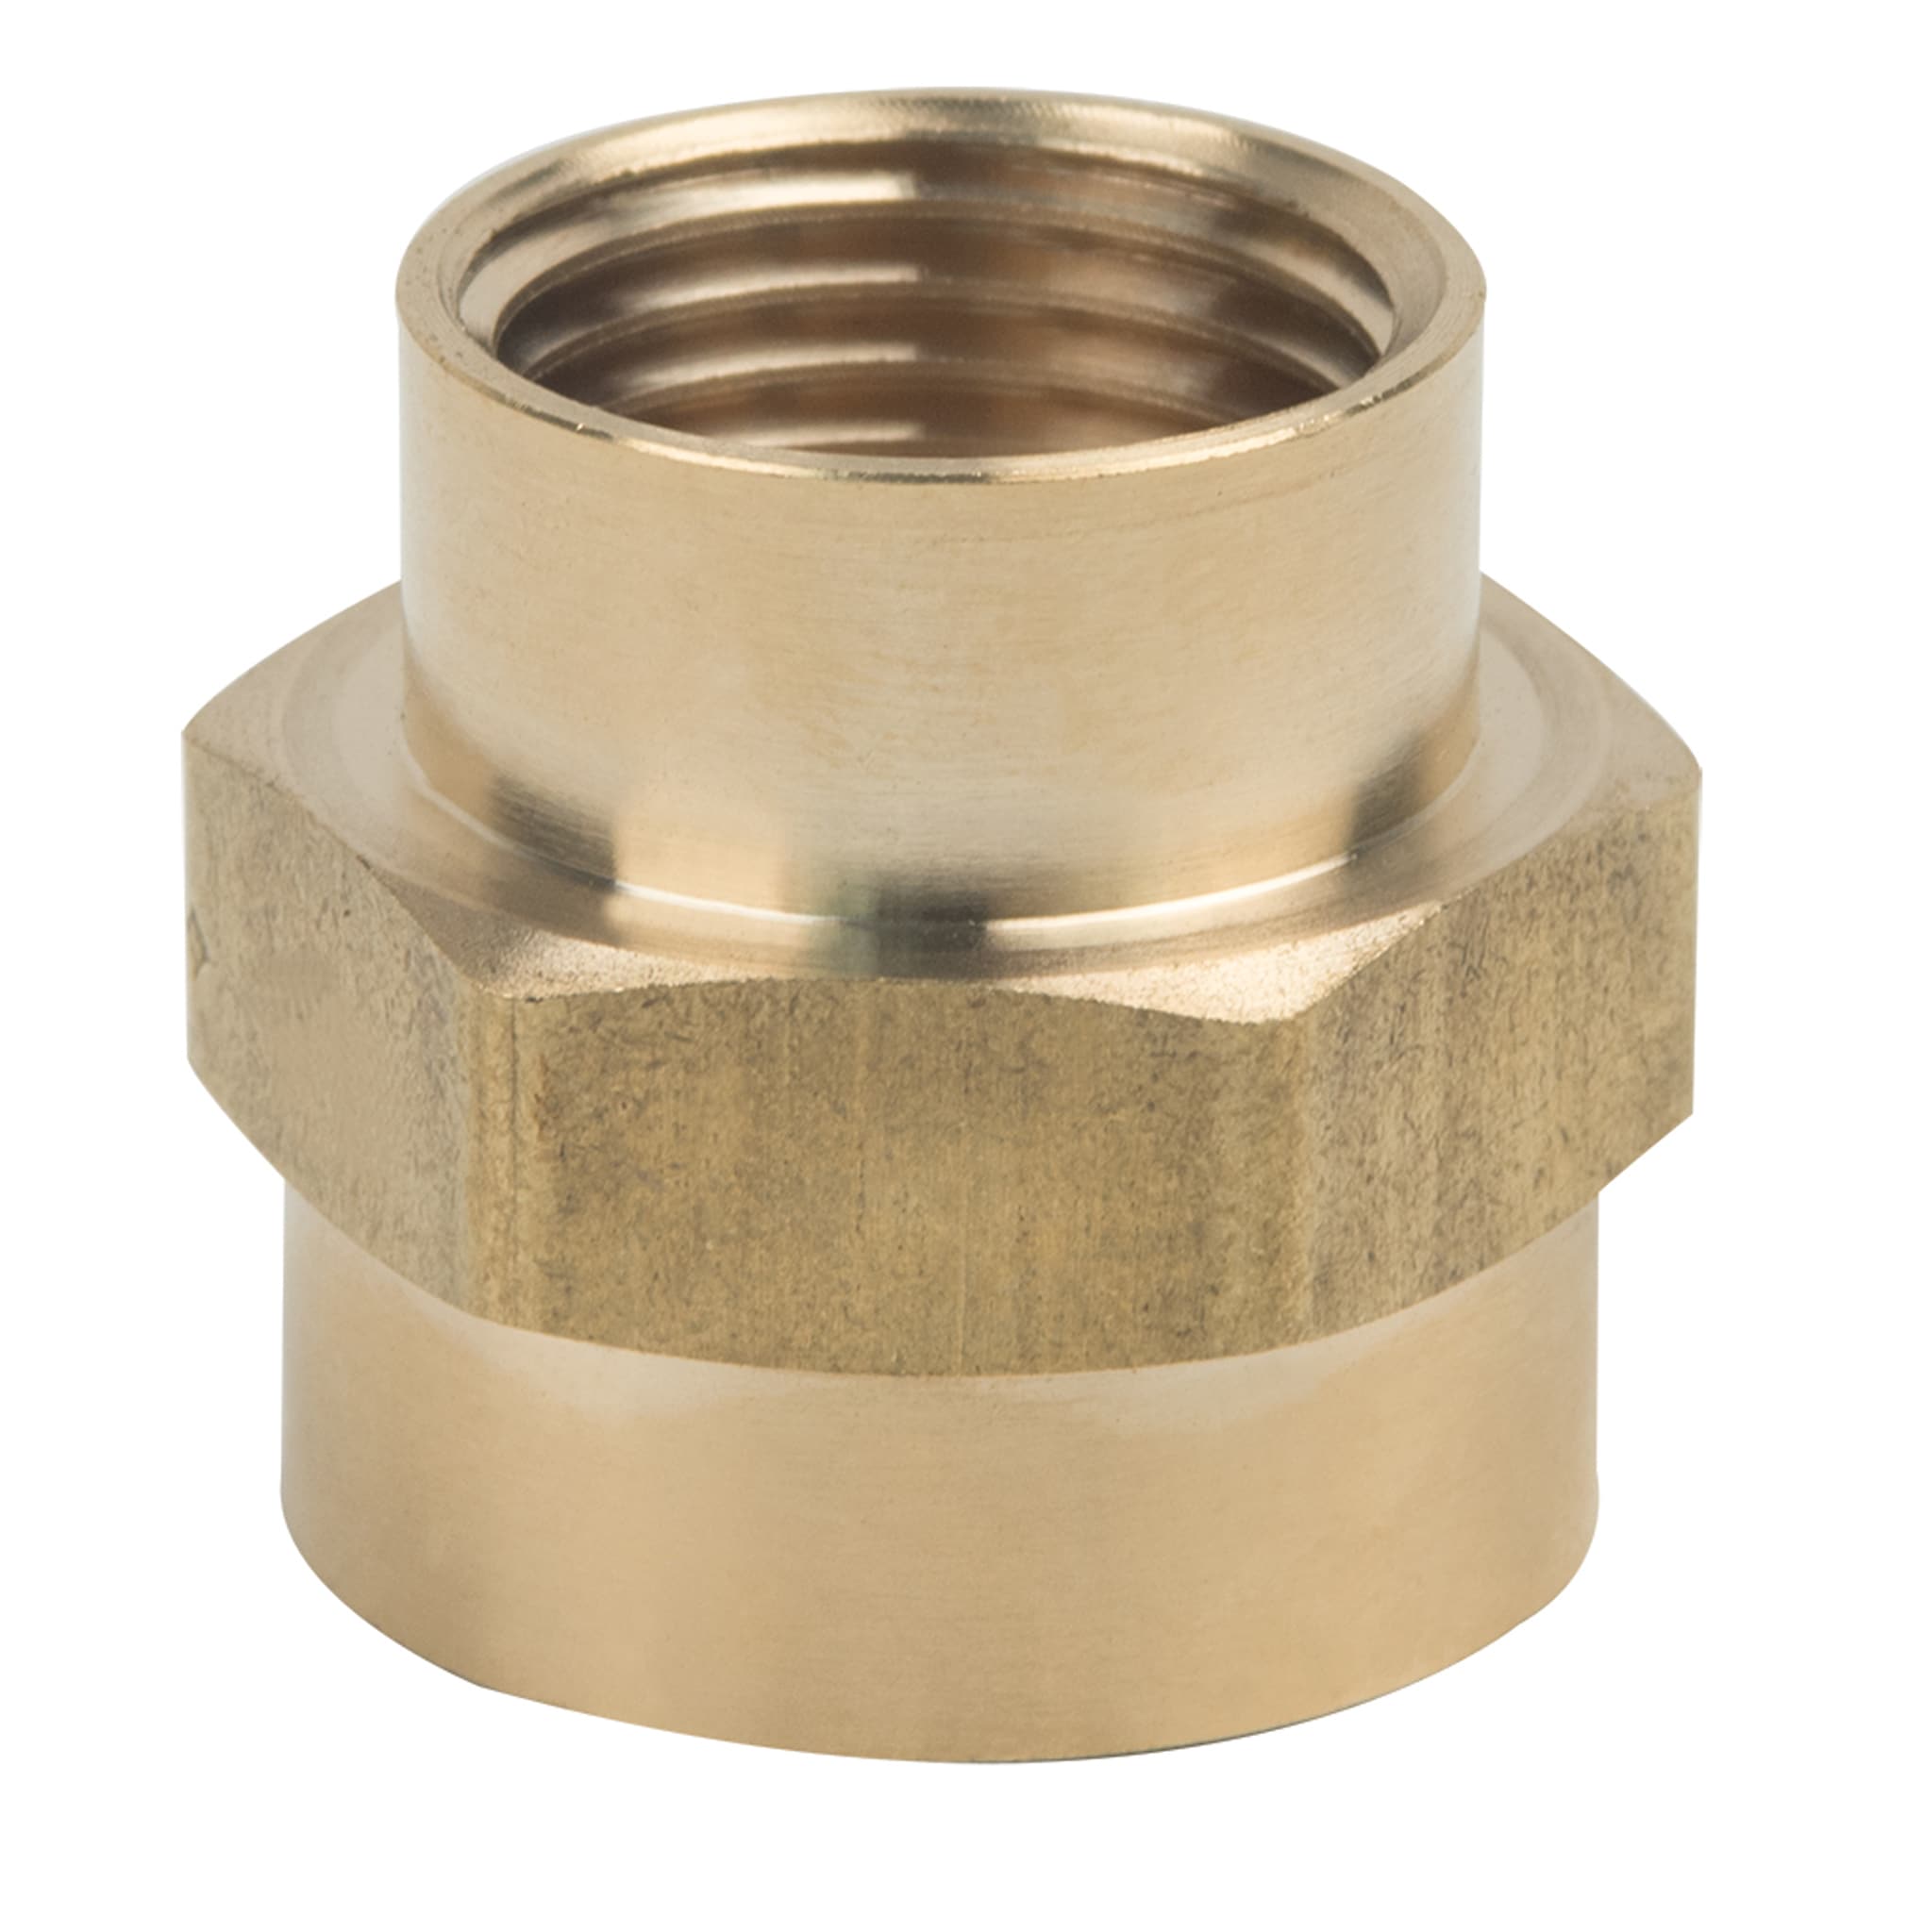 Brasscraft 3 4 In X 1 2 In Threaded Reducing Union Coupling Fitting In The Brass Fittings Department At Lowes Com